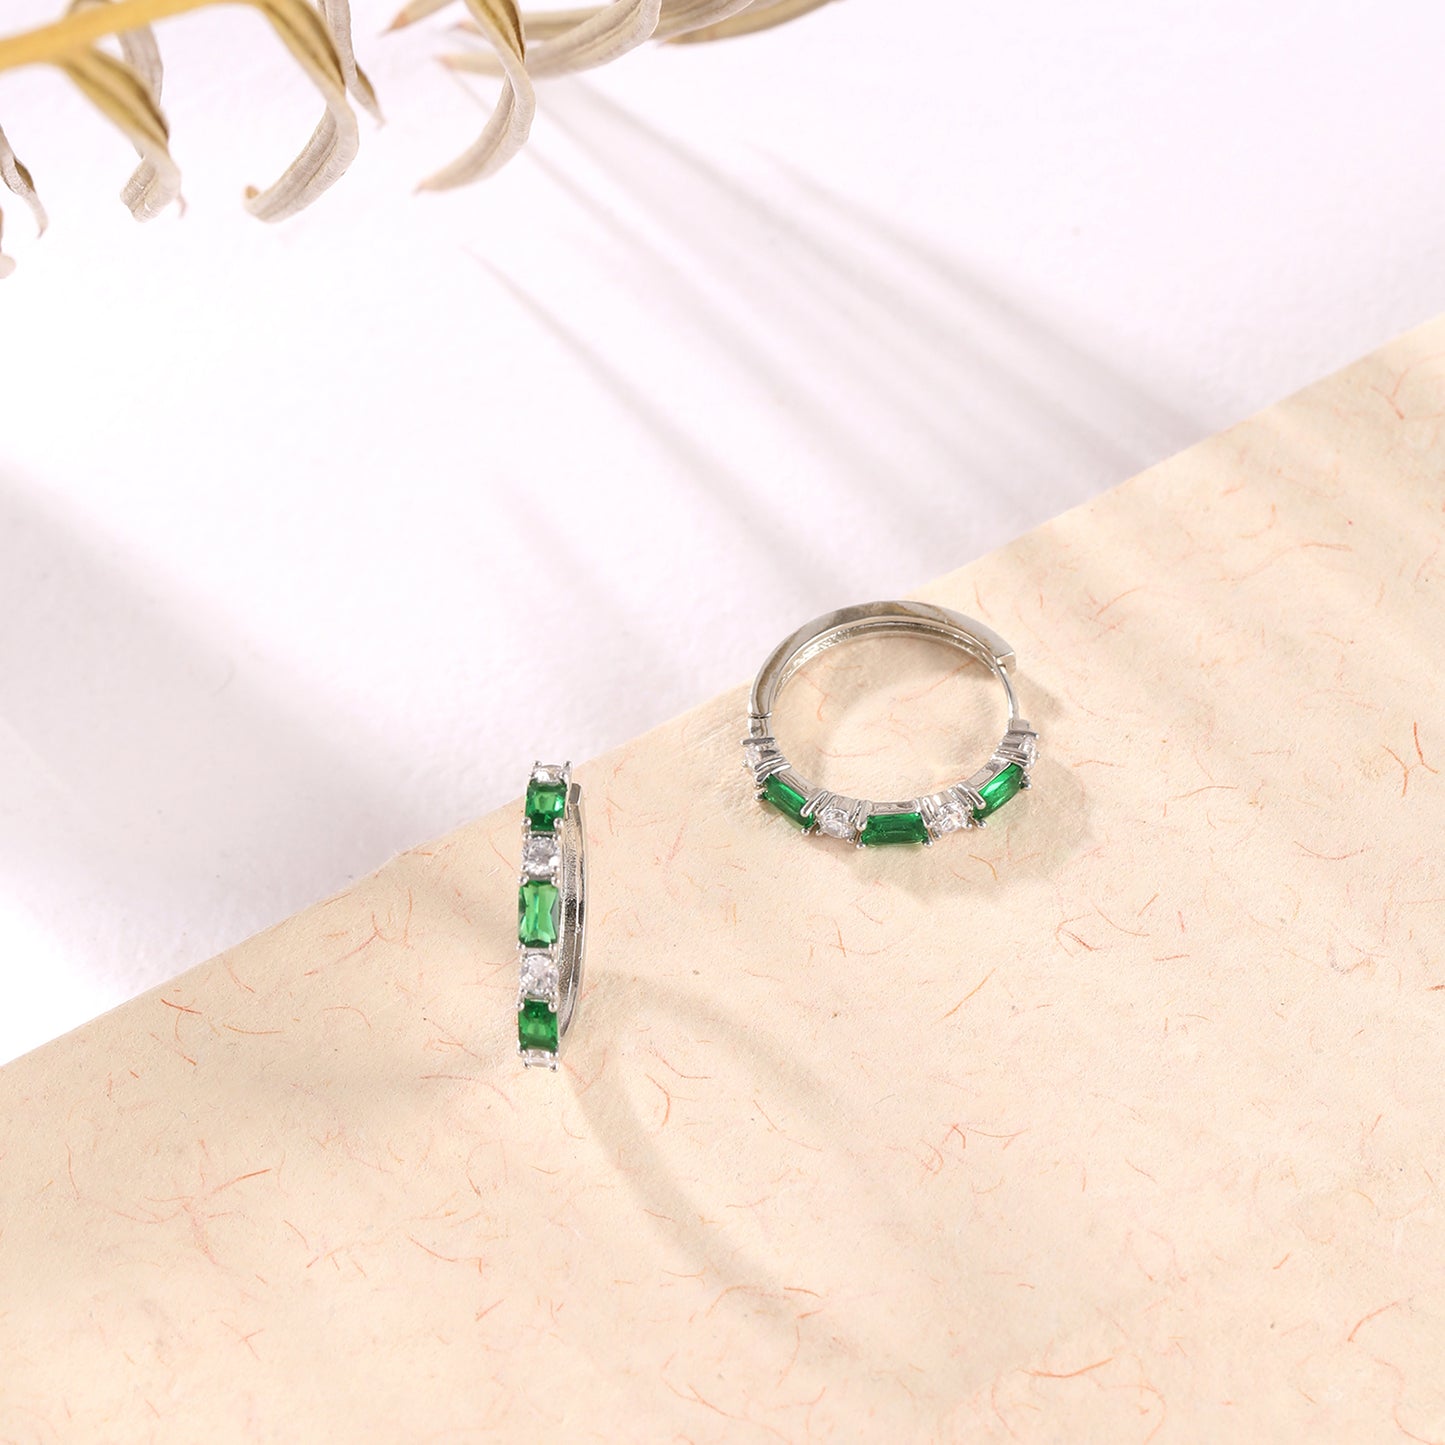 Emerald and Silver Hoops with American Diamonds Earrings